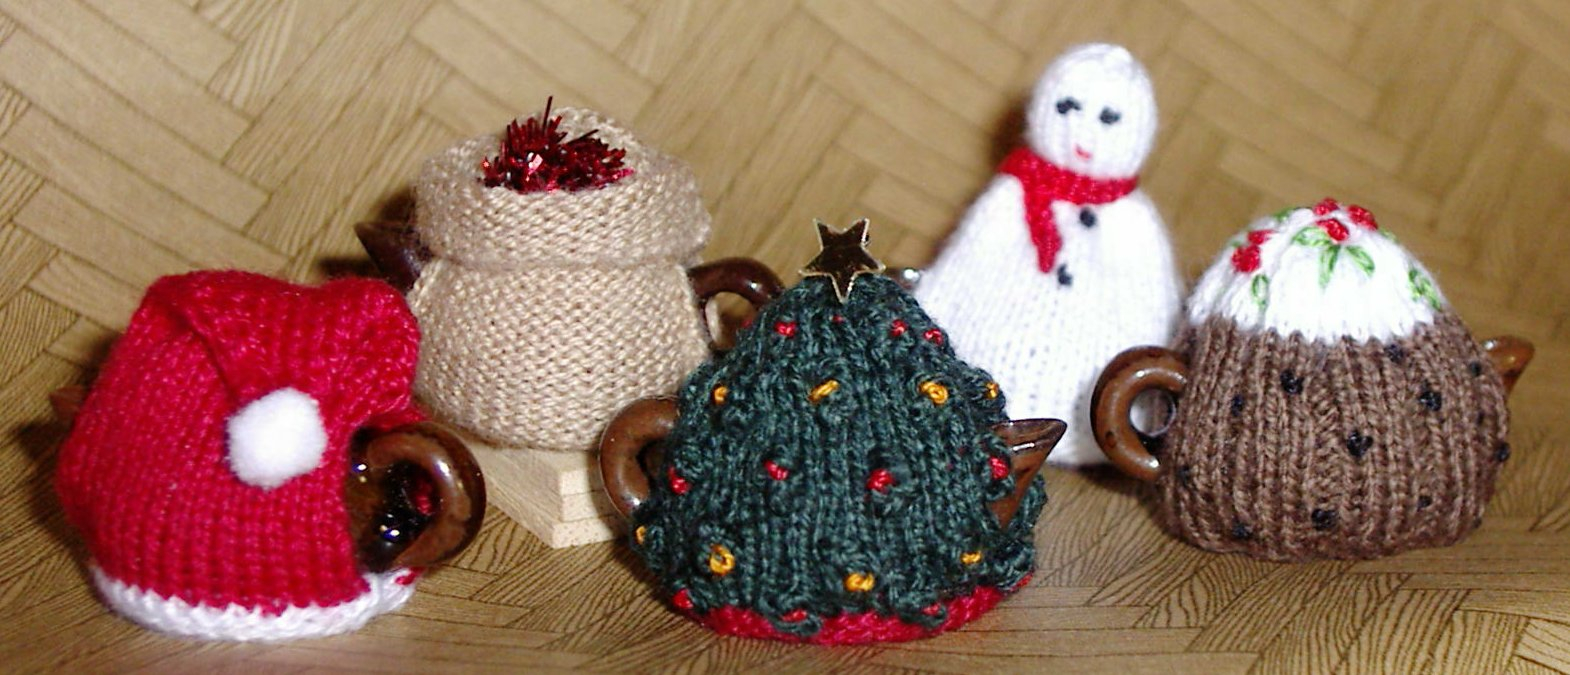 Patterns For Knitted Tea Cosies Knitting Patterns For Tea Cosy Free Knitting Patterns